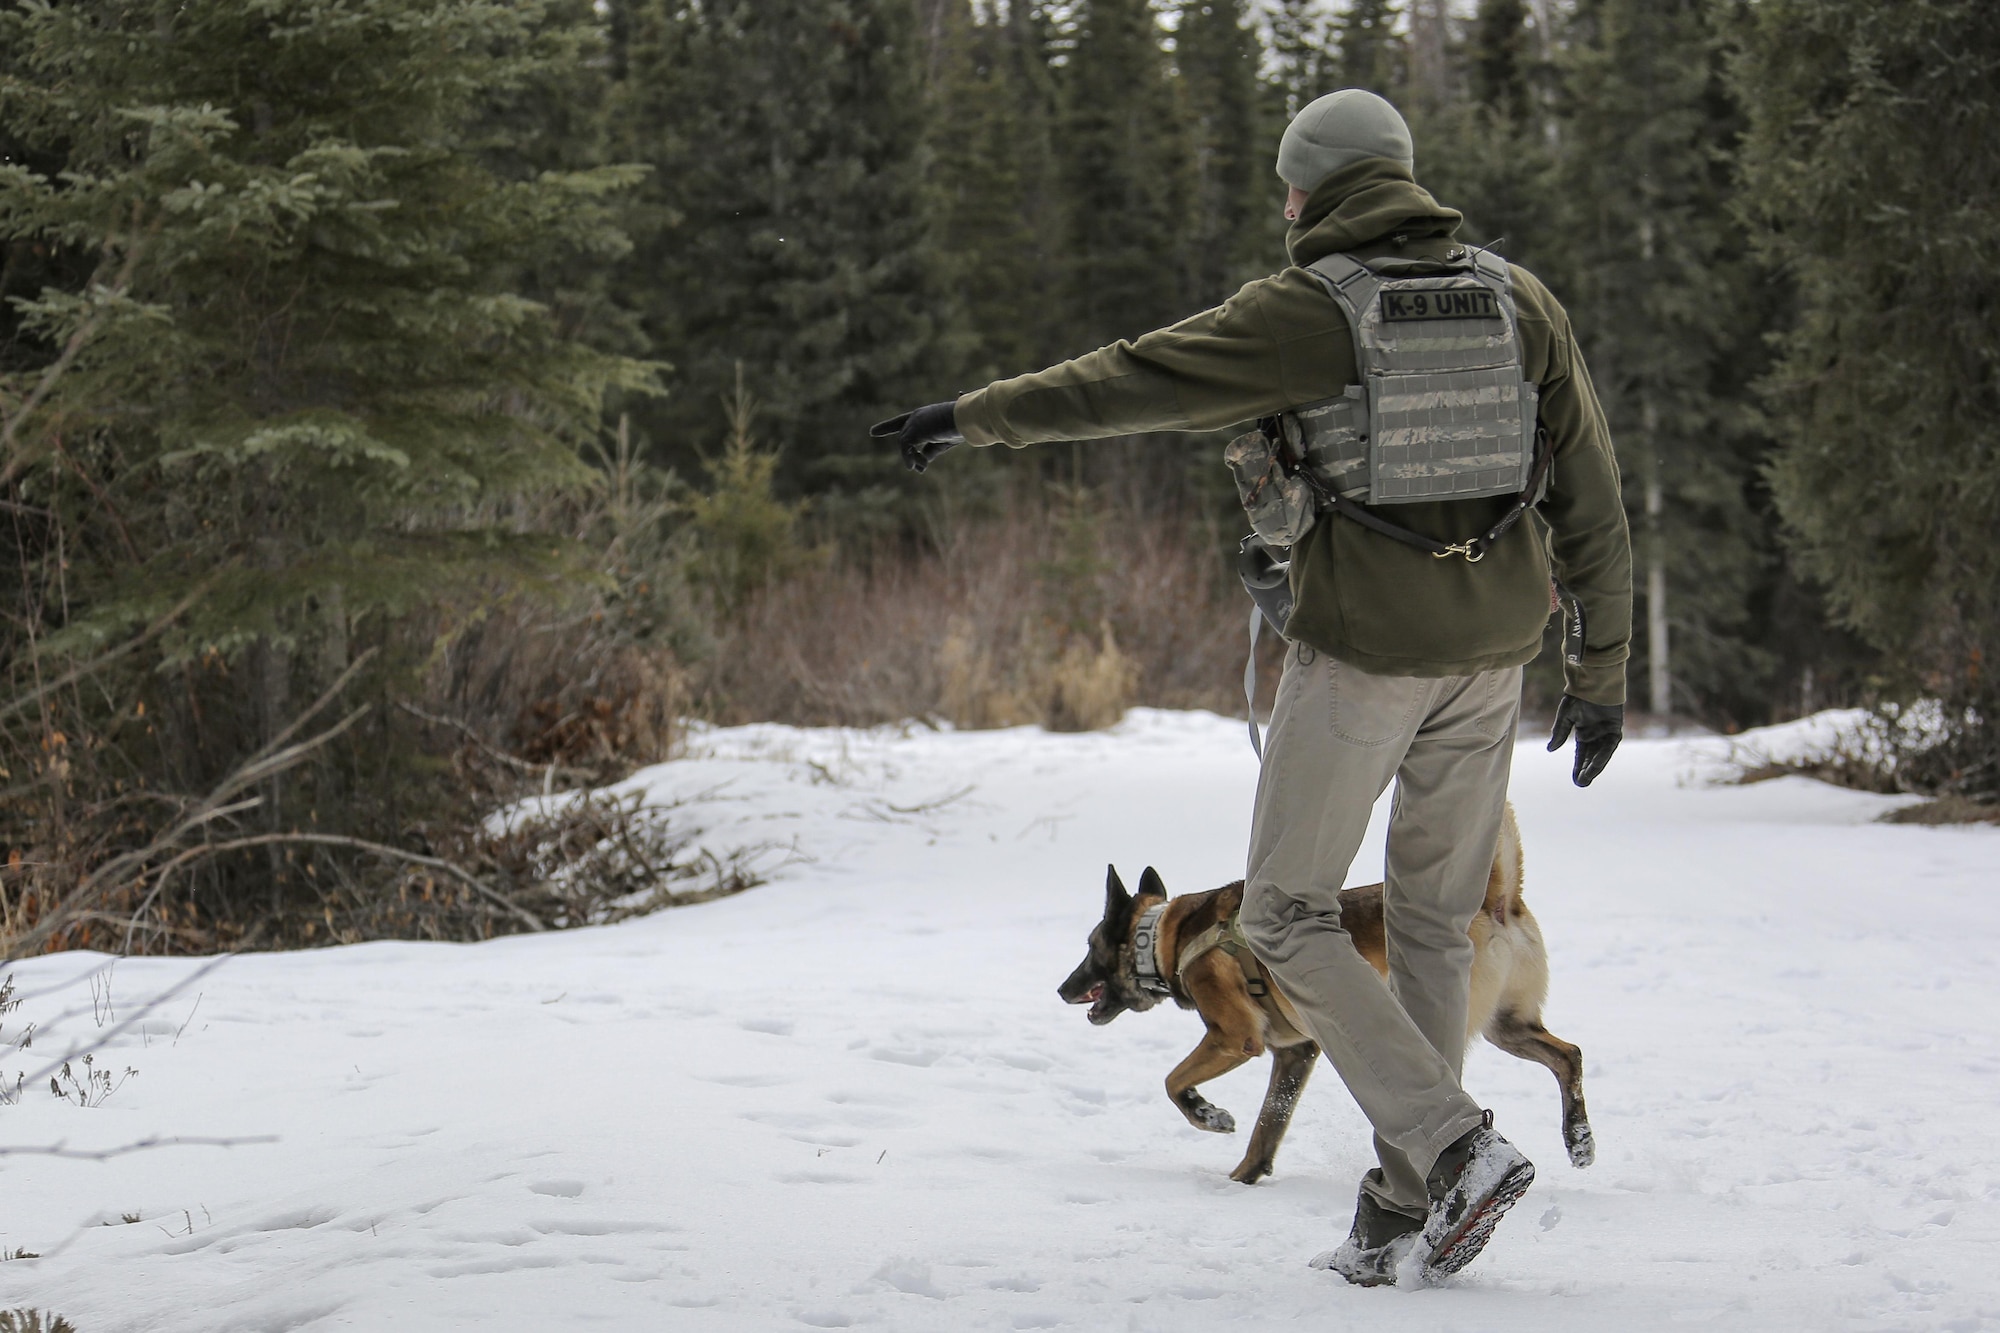 U.S. Air Force Staff Sgt. Joe Burns and military working dog, Ciko, assigned to the 673rd Security Forces Squadron, practice searching for simulated hidden explosives while conducting K-9 training at Joint Base Elmendorf-Richardson, Alaska, March 17, 2016. Military working dog teams are trained to respond to various law enforcement emergencies as well as detect hidden narcotics and explosives. (U.S. Air Force photo/Alejandro Pena)